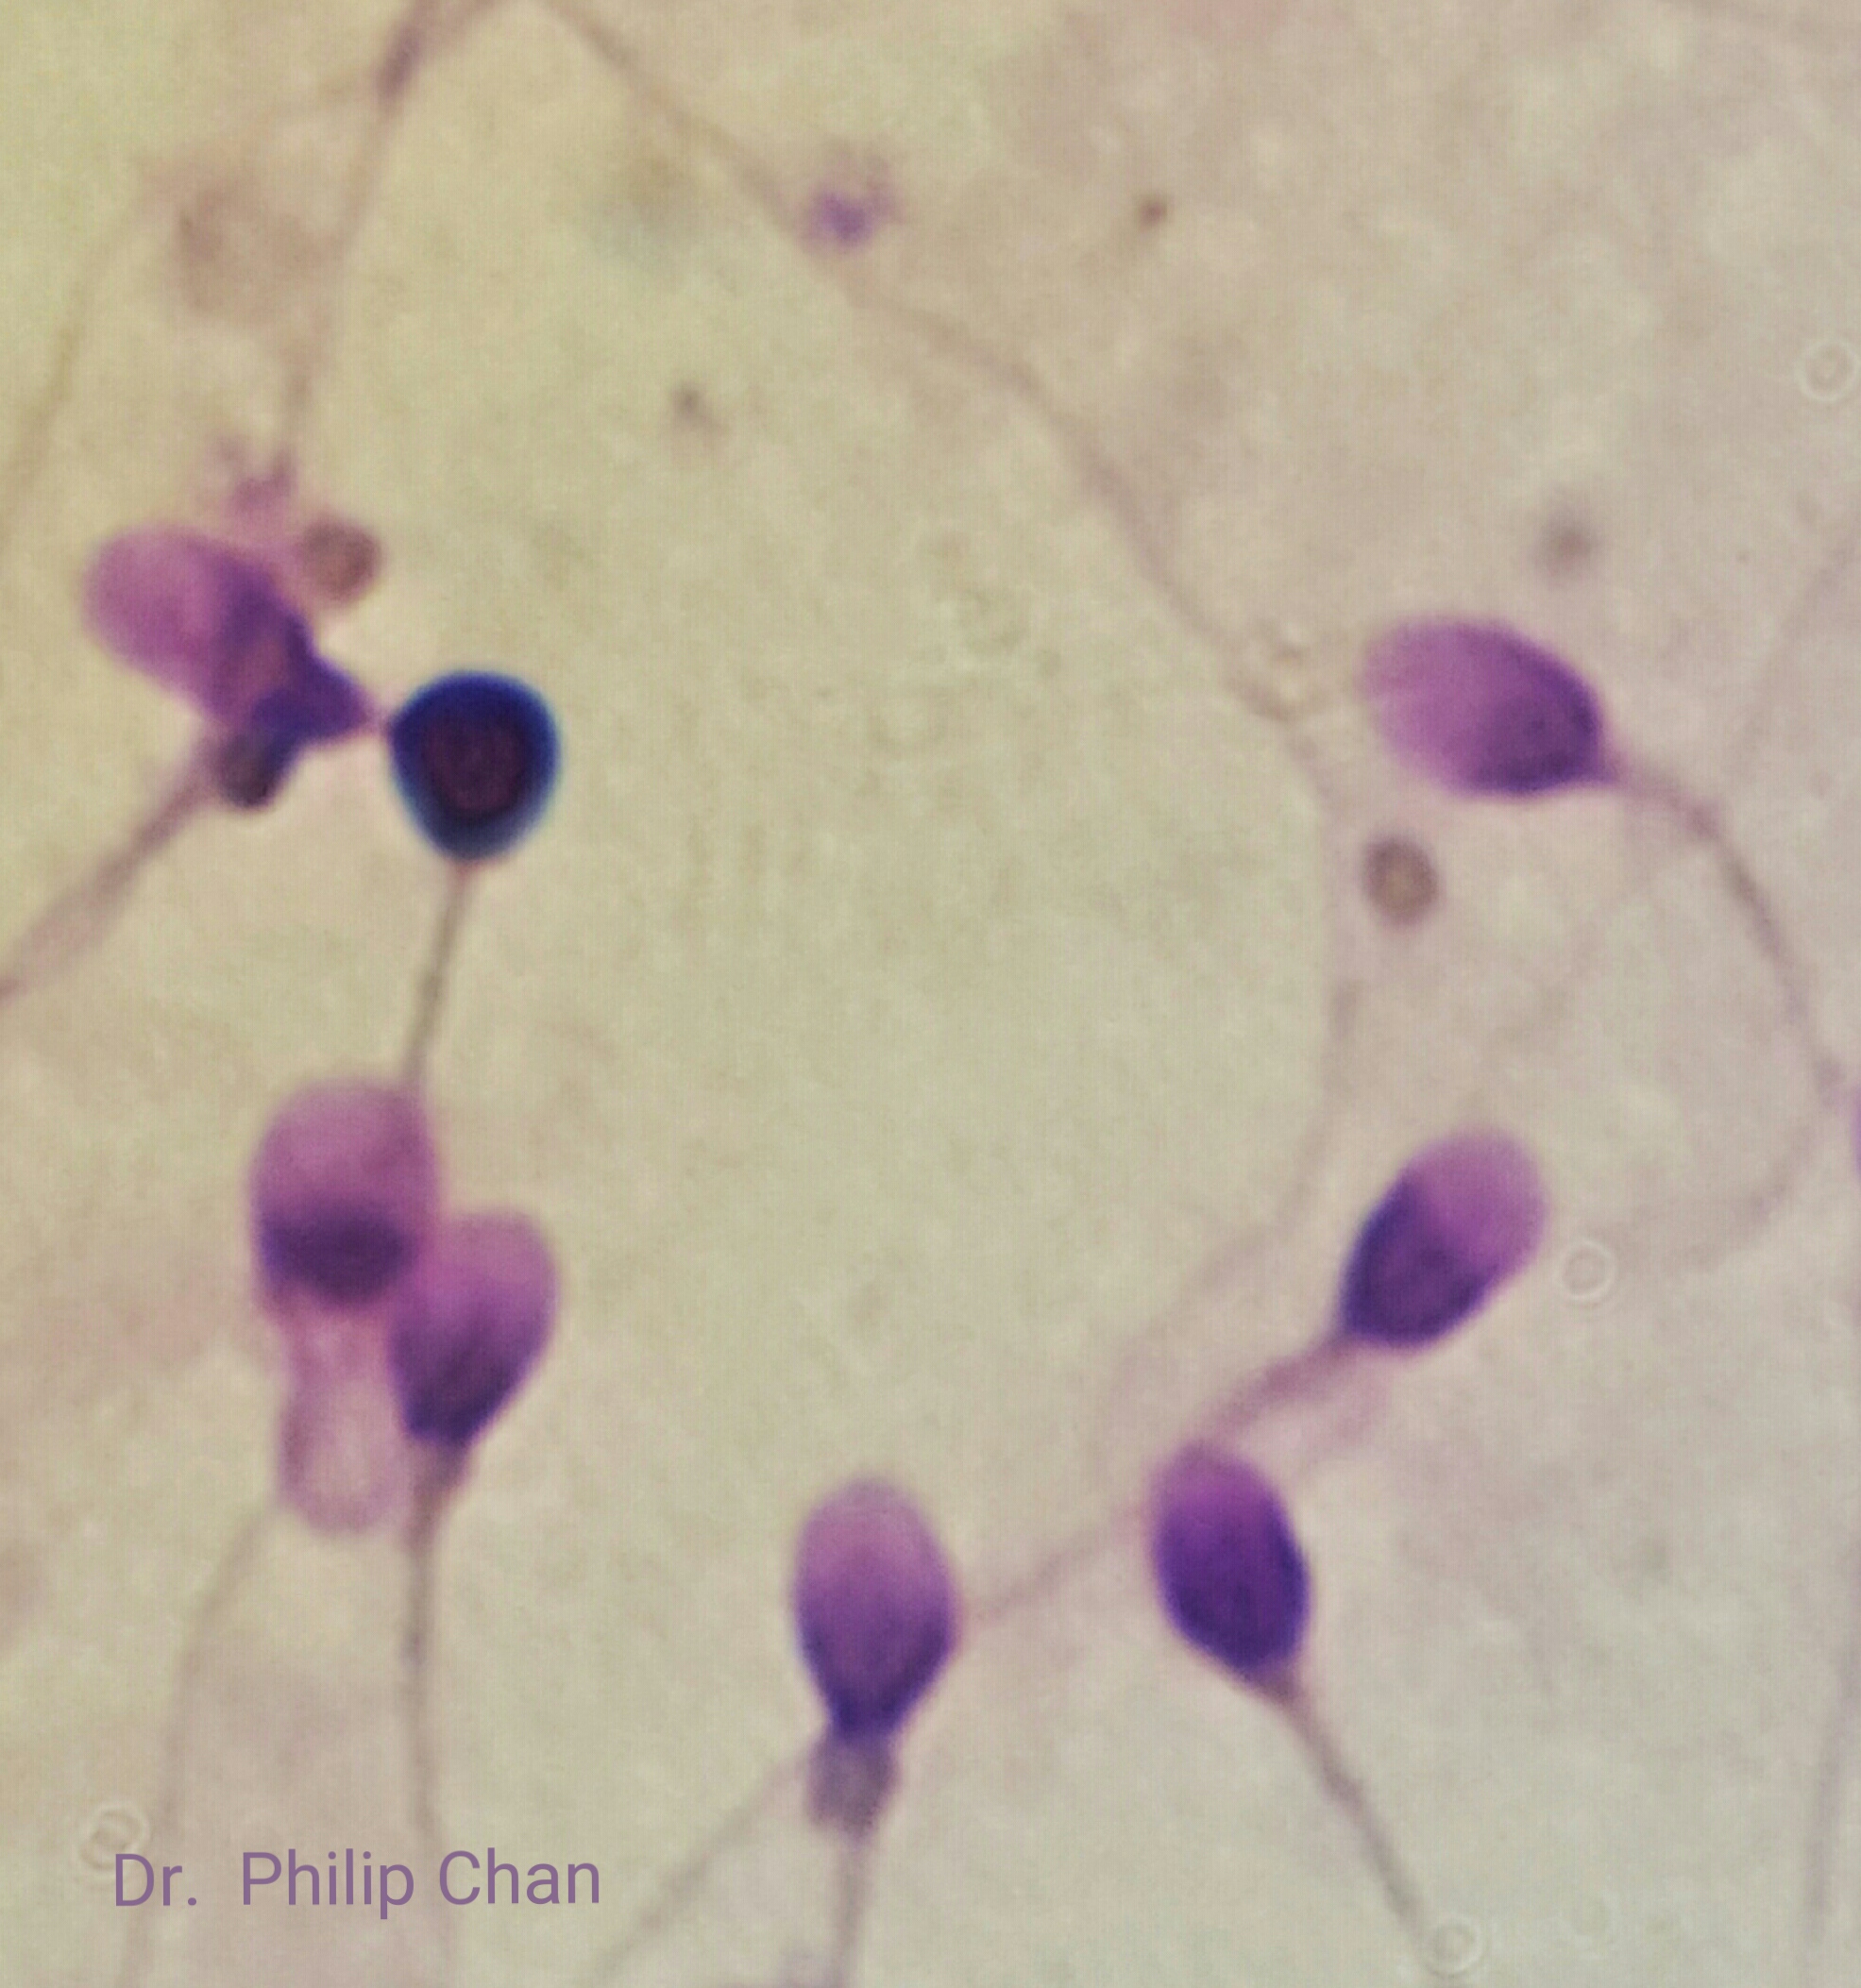 Spot the single DNA damaged sperm? The dark-colored sperm is due to increased dye binding at broken DNA or exposed chromatin structure.